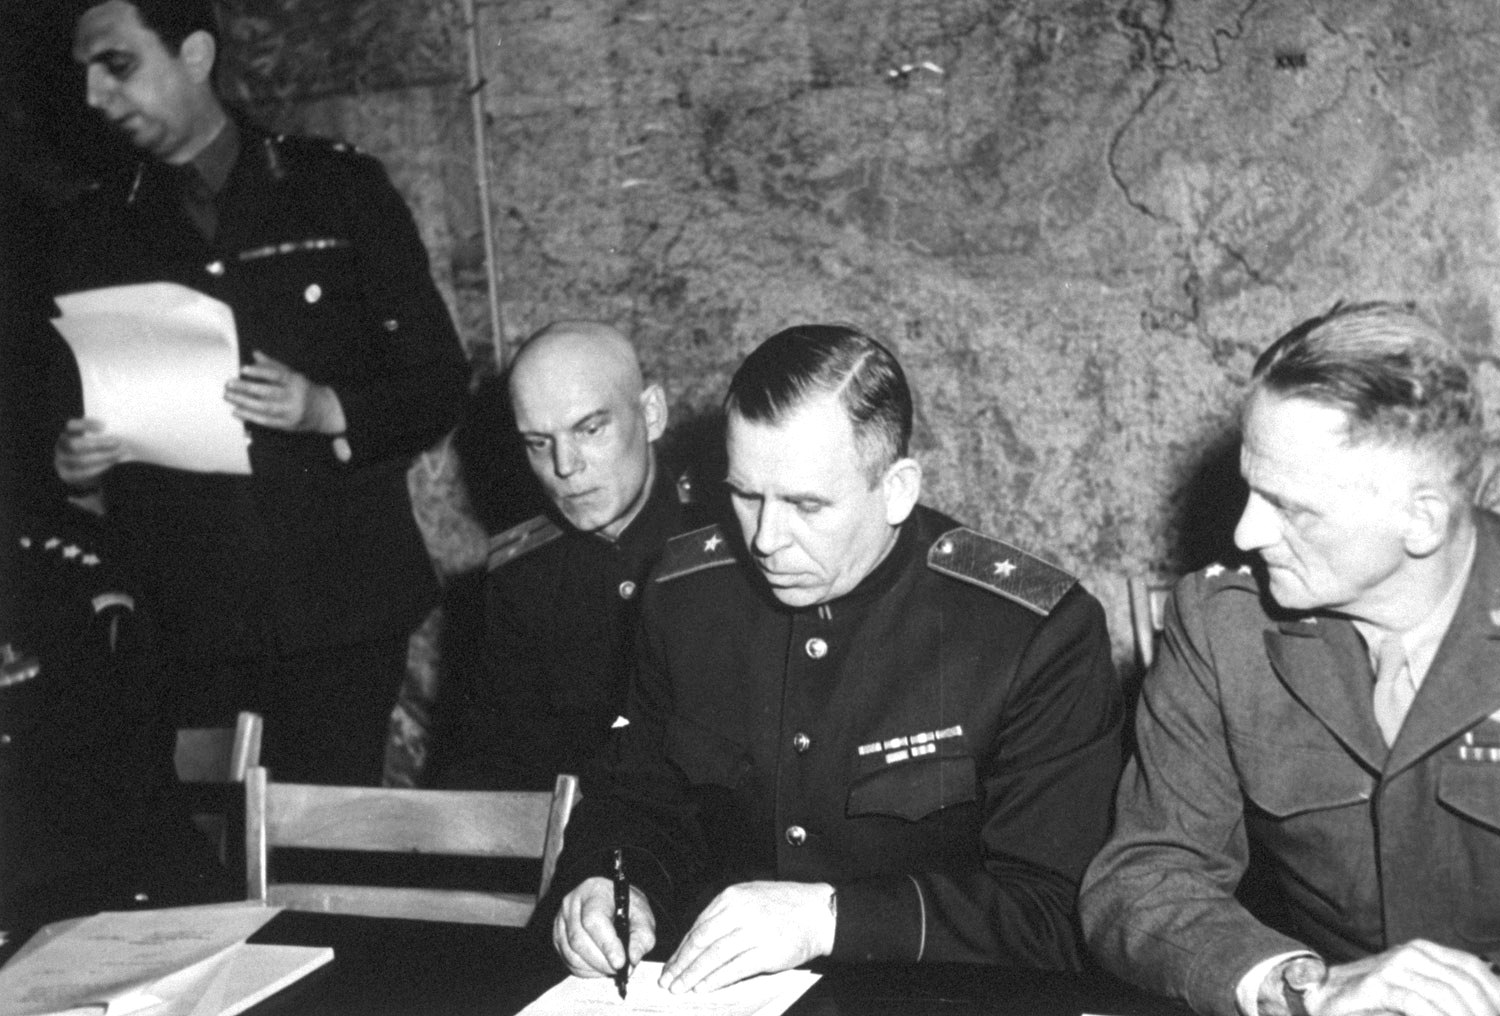 Soviet General Ivan Susloparov signing the documents of Germany's surrender, Reims, France, 7 May 1945. His aide is on the left and USAAF LtGen Carl Spaatz on the right.